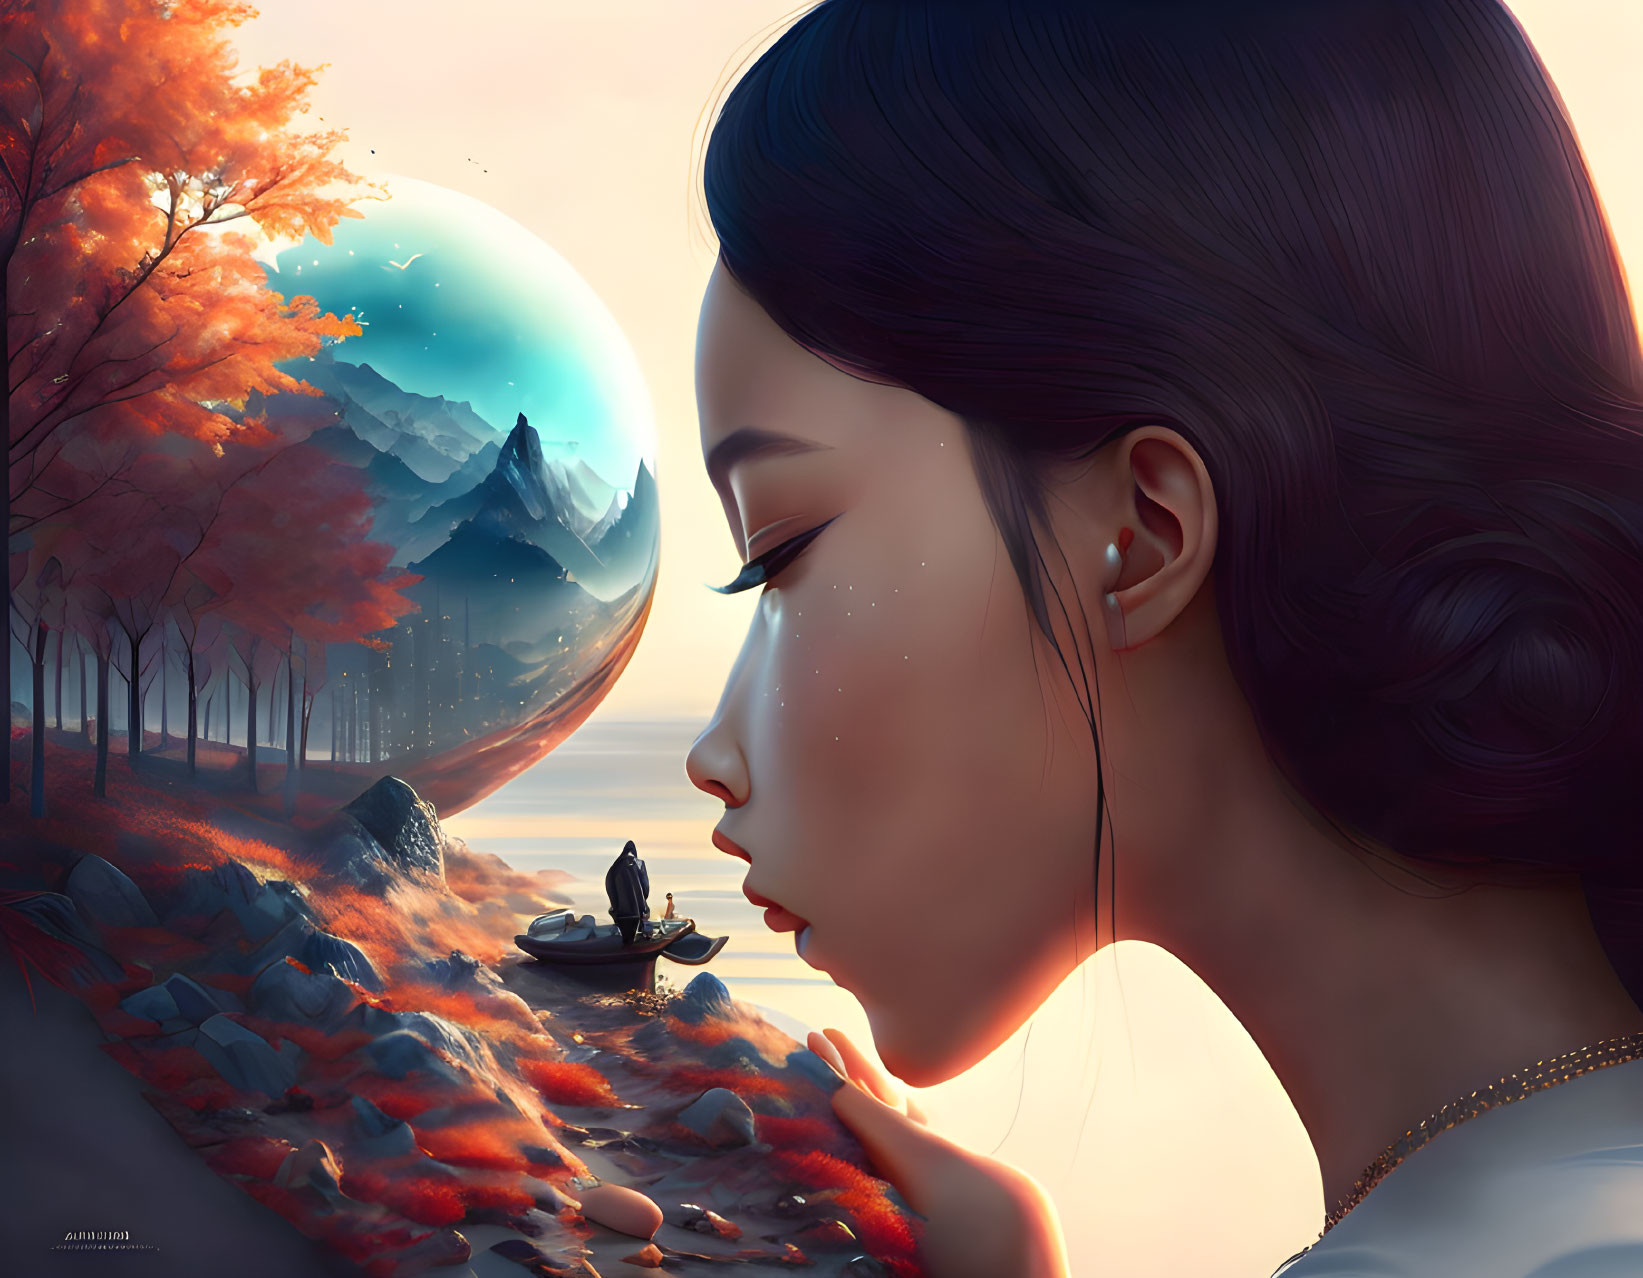 Digital art: Woman's profile in fantasy landscape sphere with autumn trees & mountain